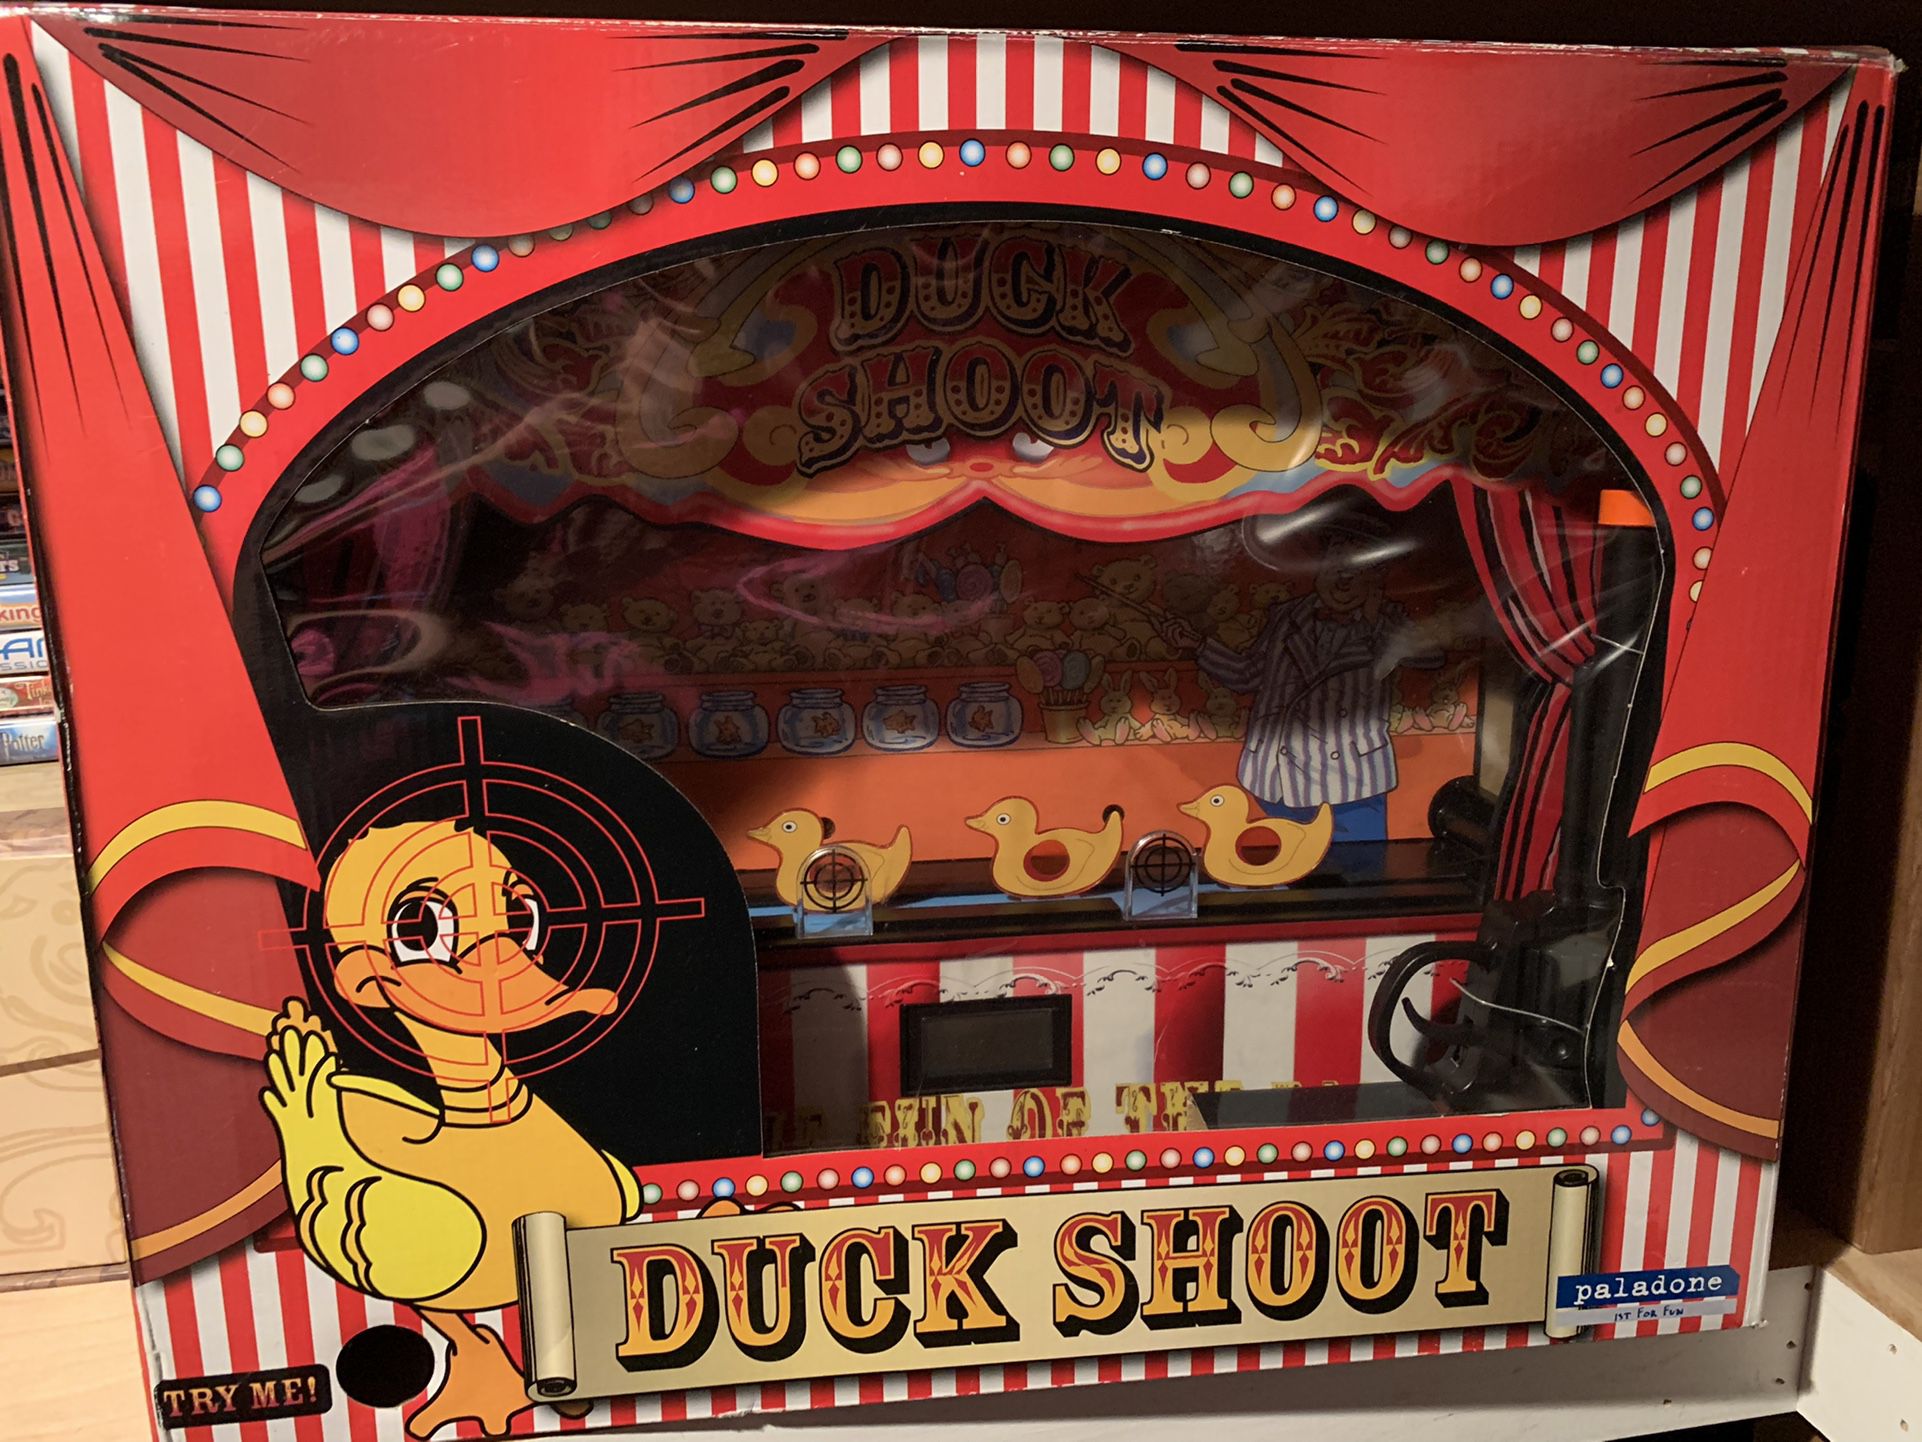 Duck shoot arcade Style Game Never Used